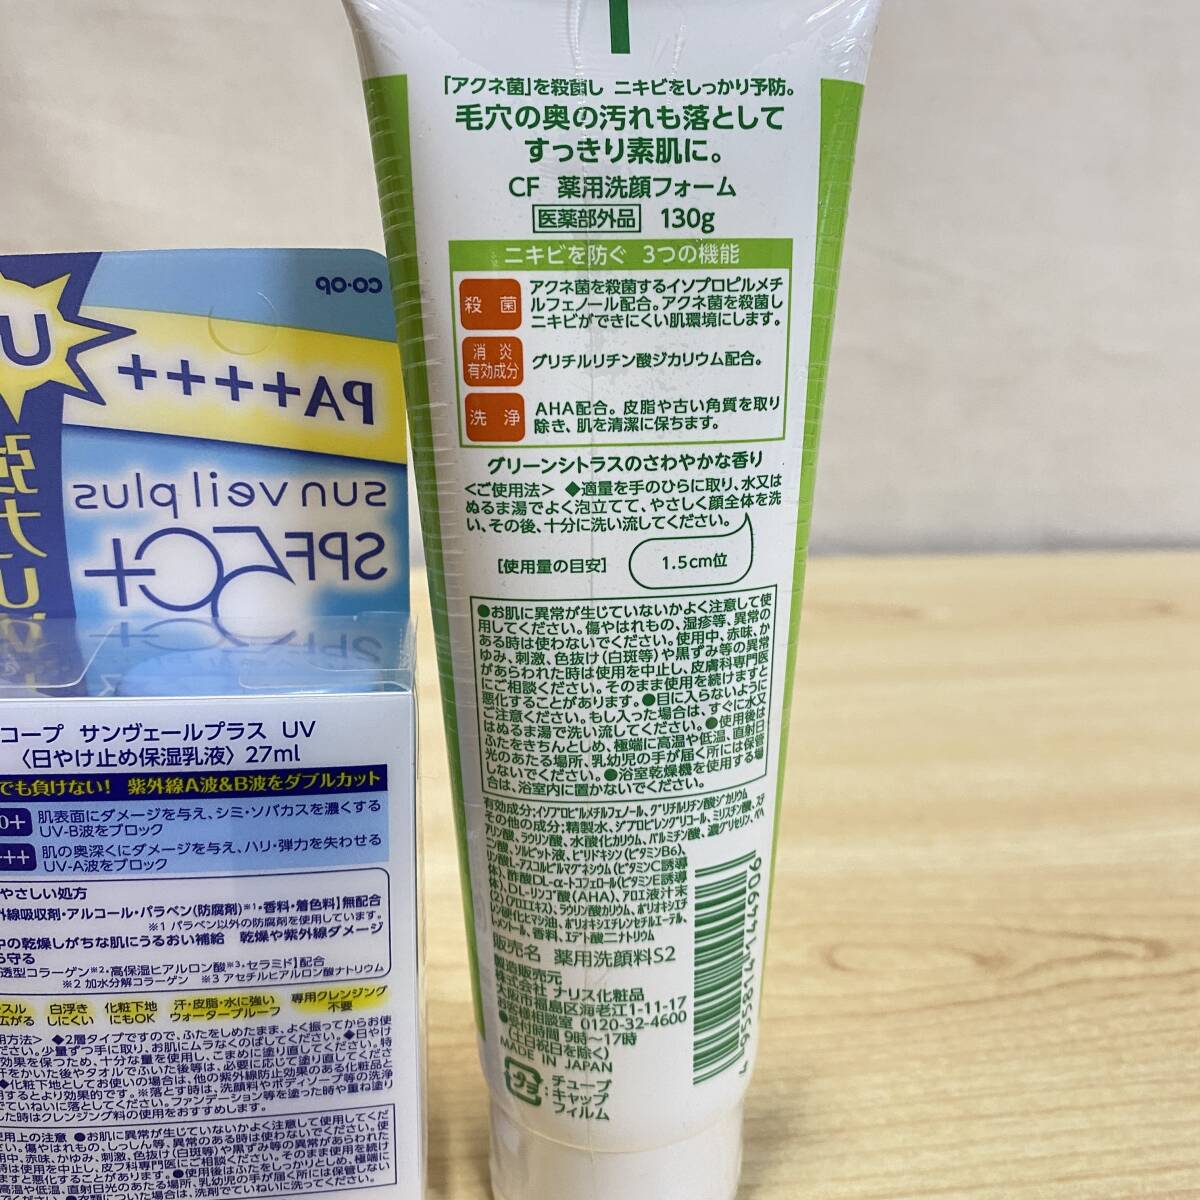 BC092[ cosmetics ] cosme { unopened goods equipped }ko-p sun ve-ru plus UVs gold aqua another total 5 point sunscreen . face shampoo 